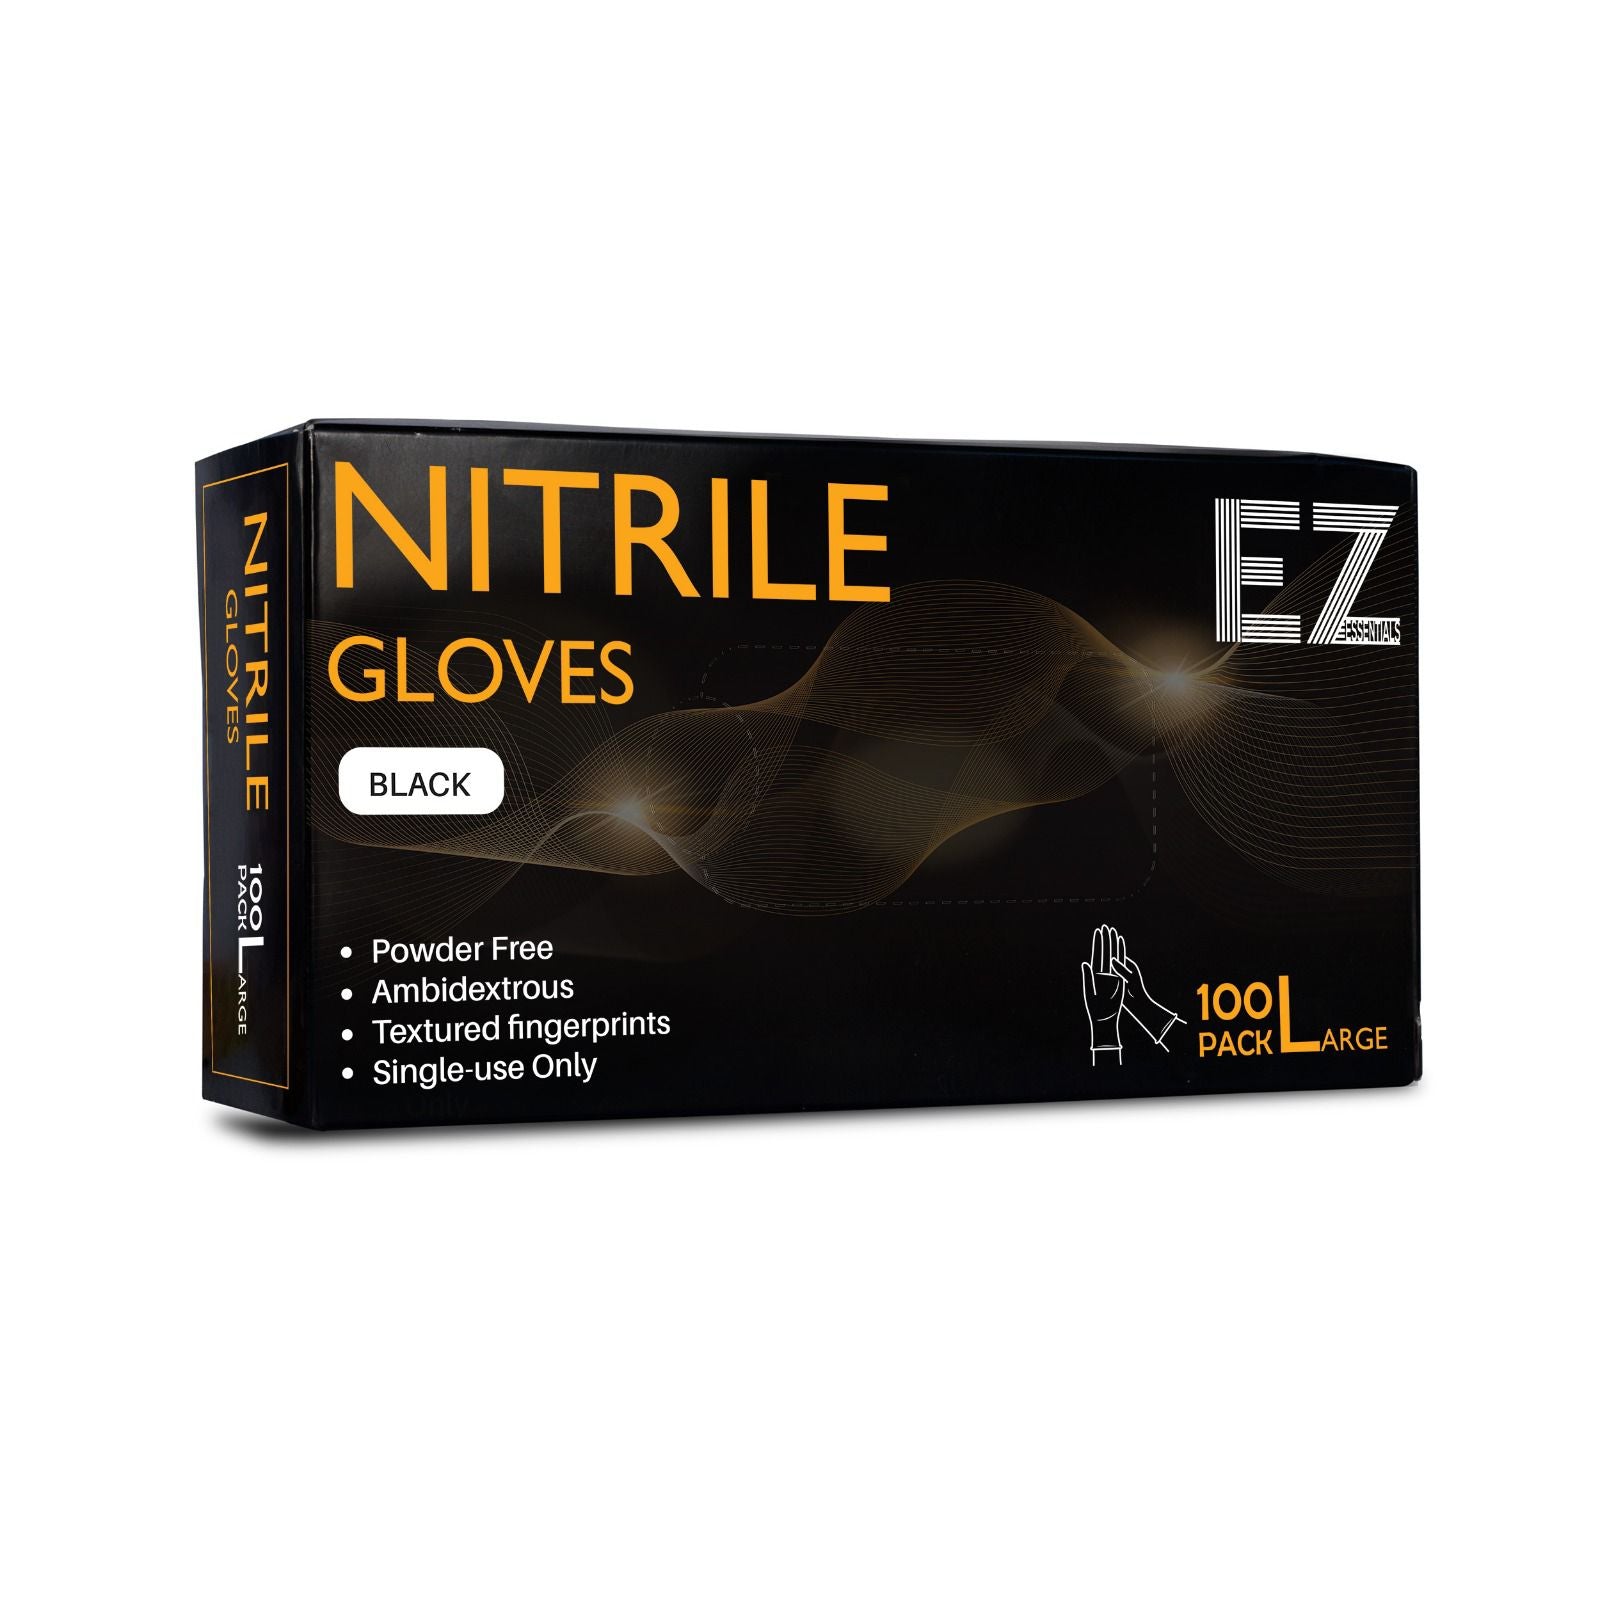 EZFOIL NITRILE GLOVES BLACK 100 PACK - LARGE - HairBeautyInk